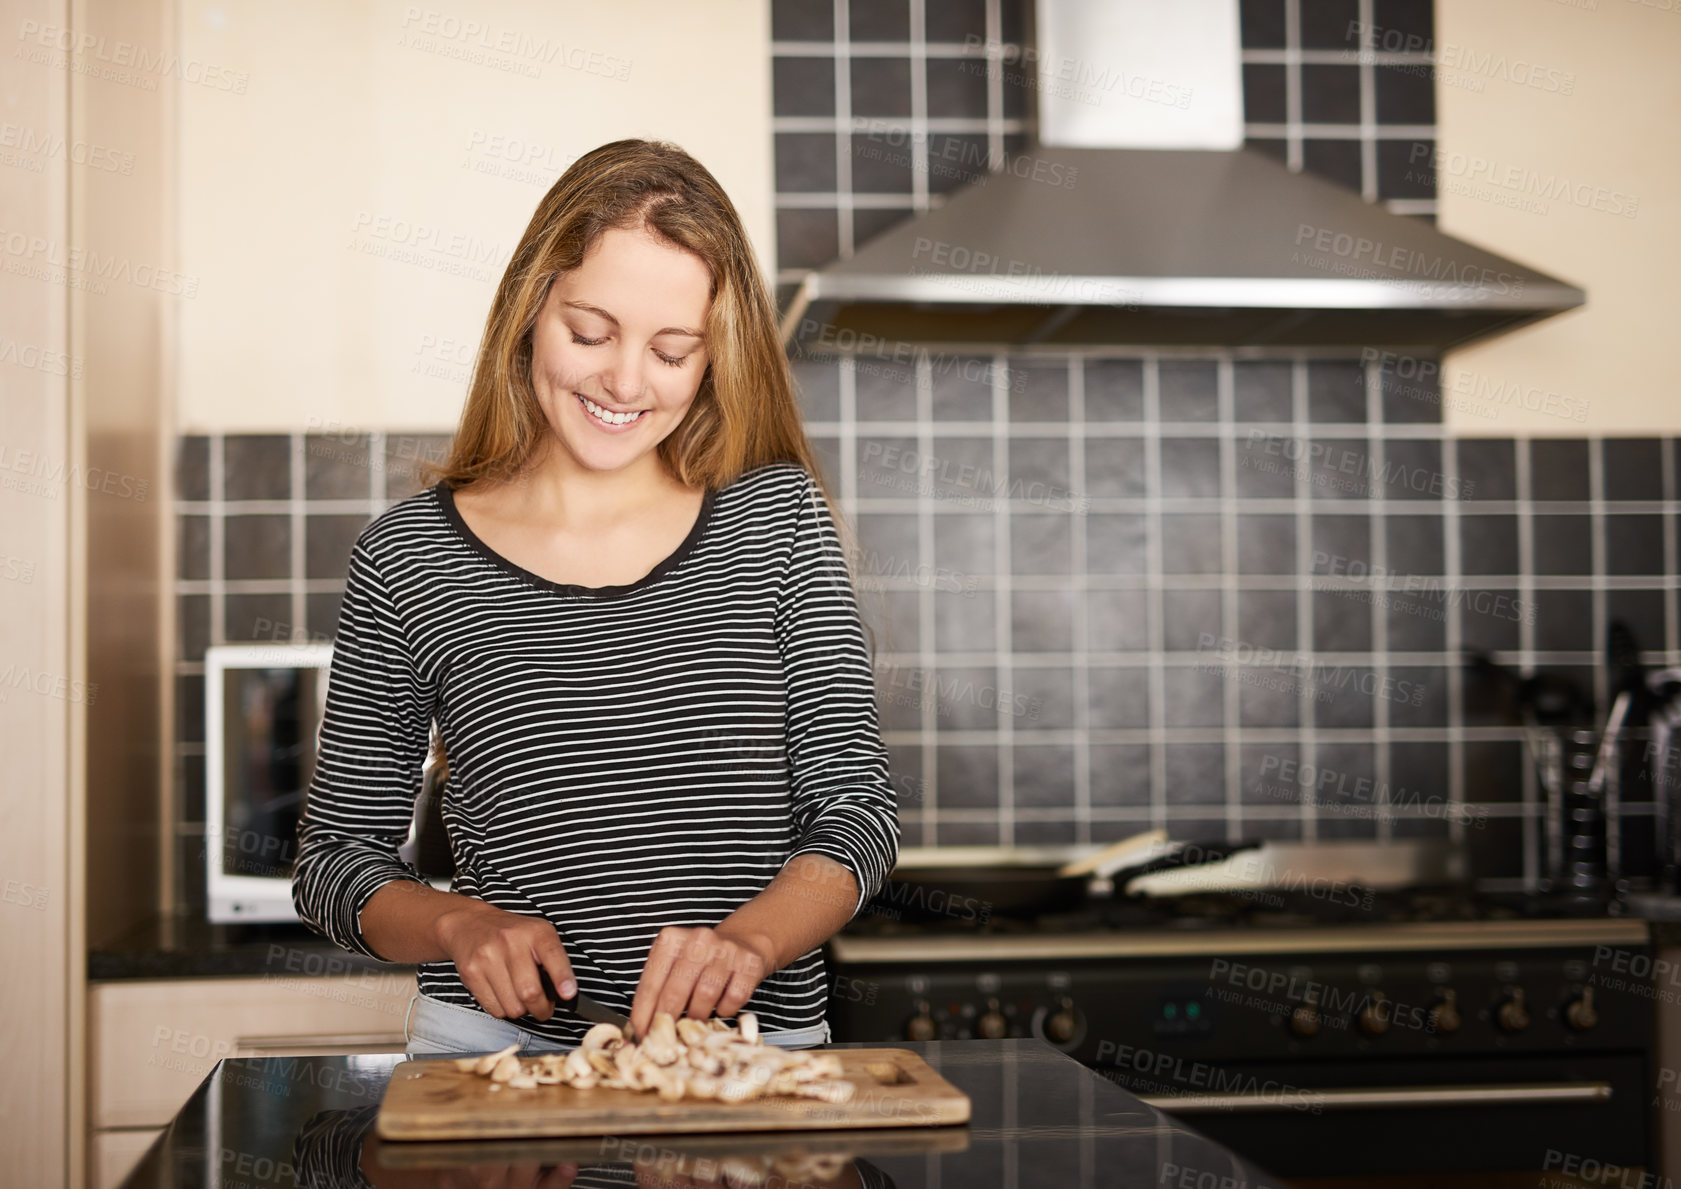 Buy stock photo Shot of a happy young woman slicing mushrooms on a chopping board in the kitchen